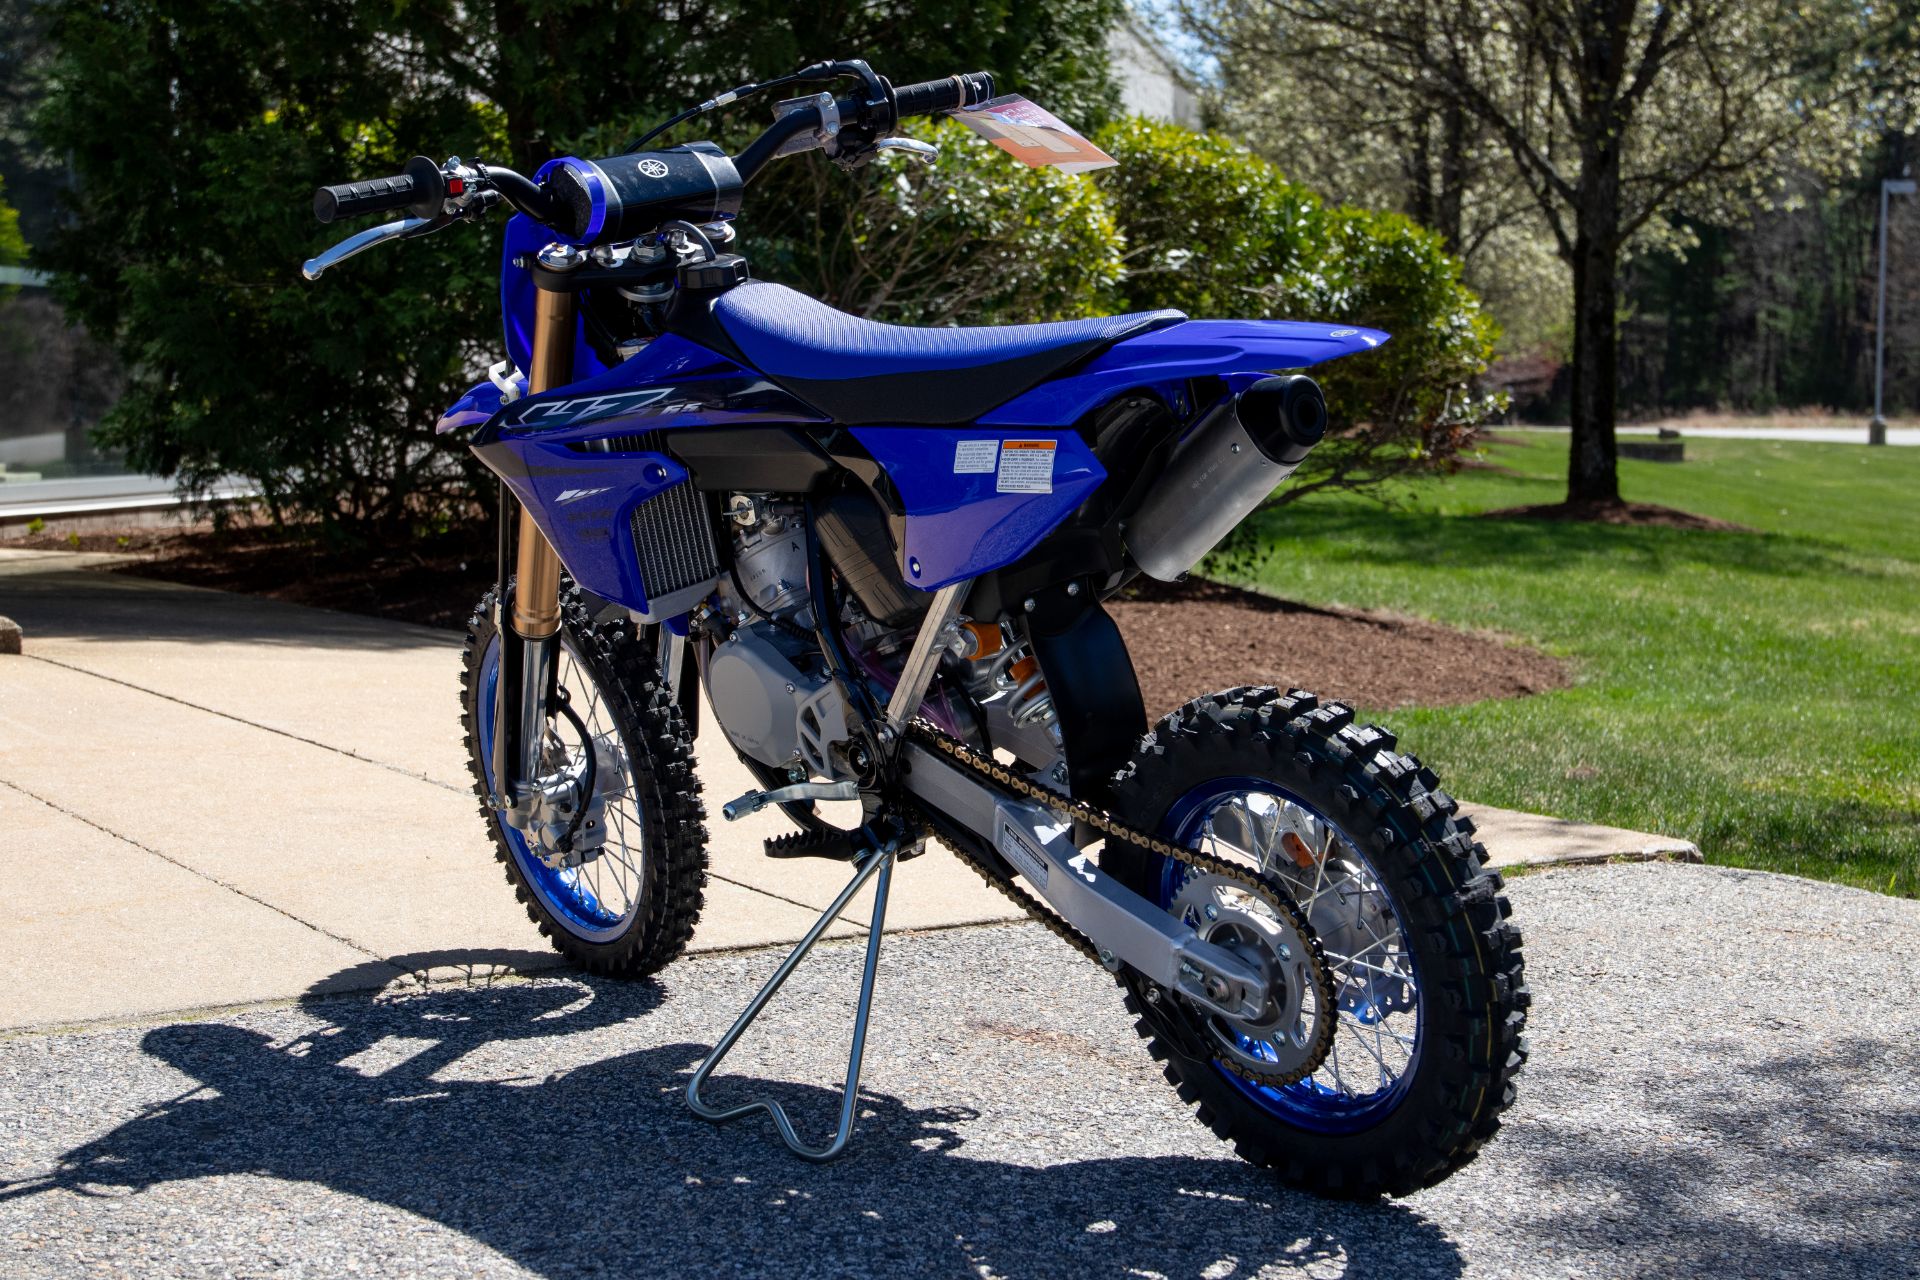 2023 Yamaha YZ65 in Concord, New Hampshire - Photo 4